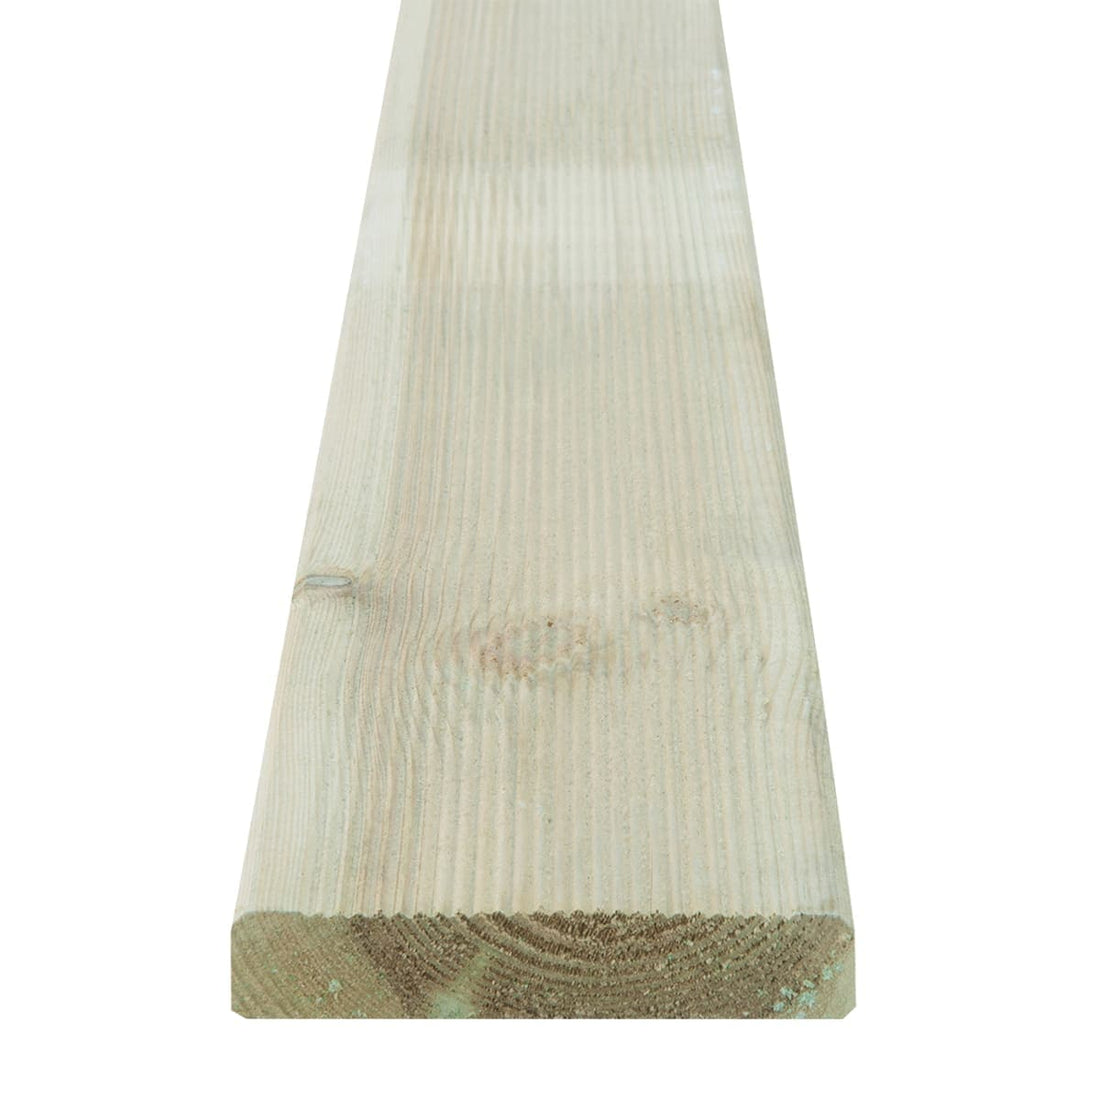 AUTOCLAVE-TREATED WOODEN FLOORBOARD 9.5 X 240 X H1.9 CM